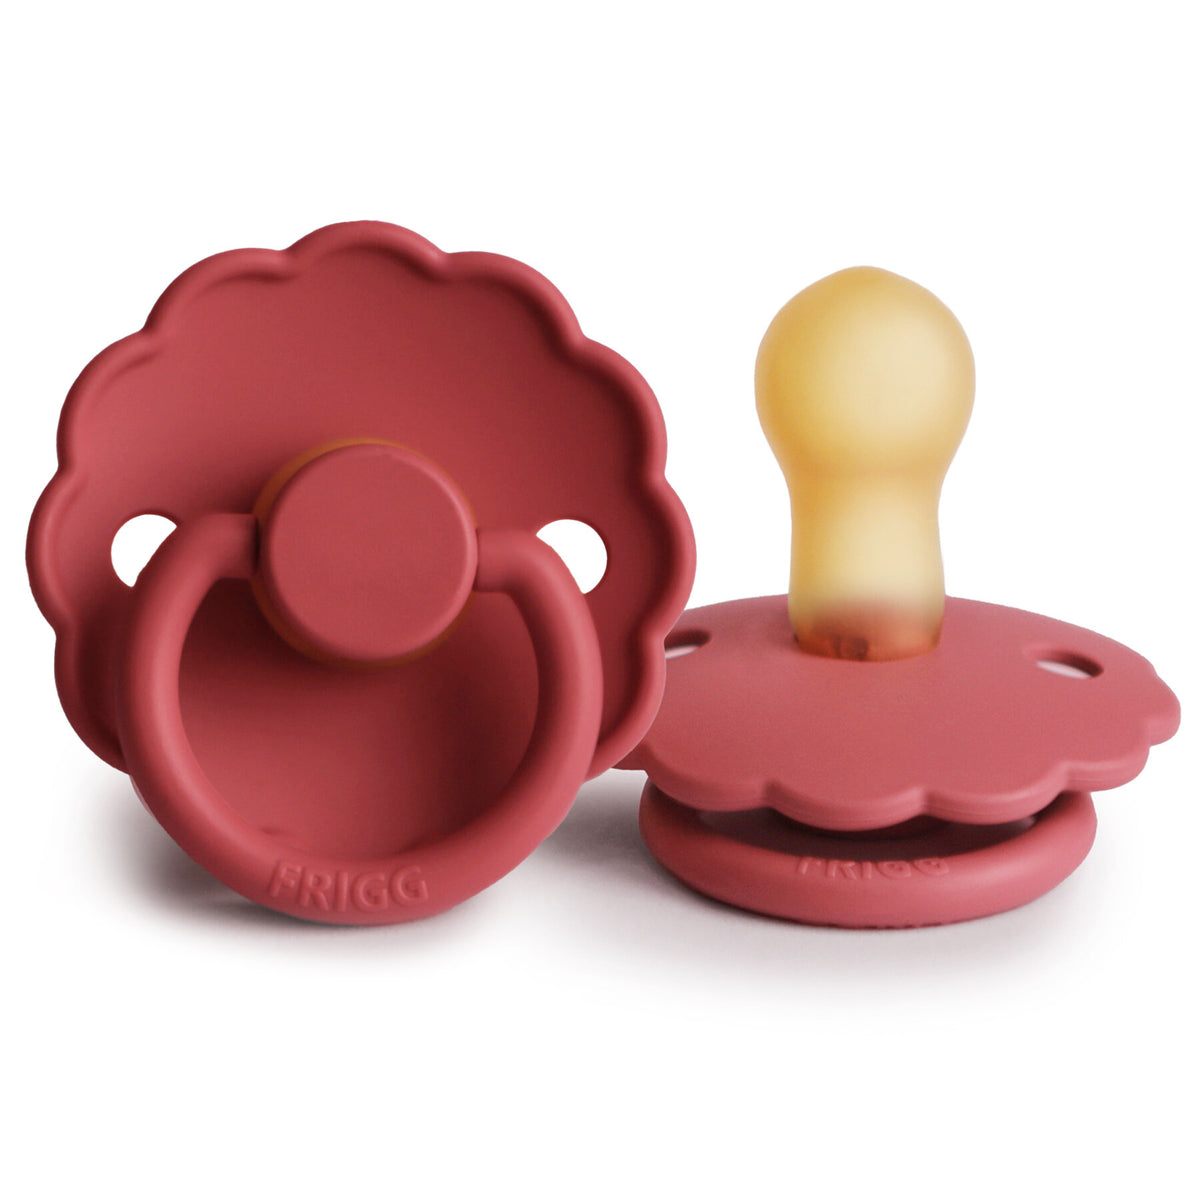 FRIGG daisy pacifier Scarlet